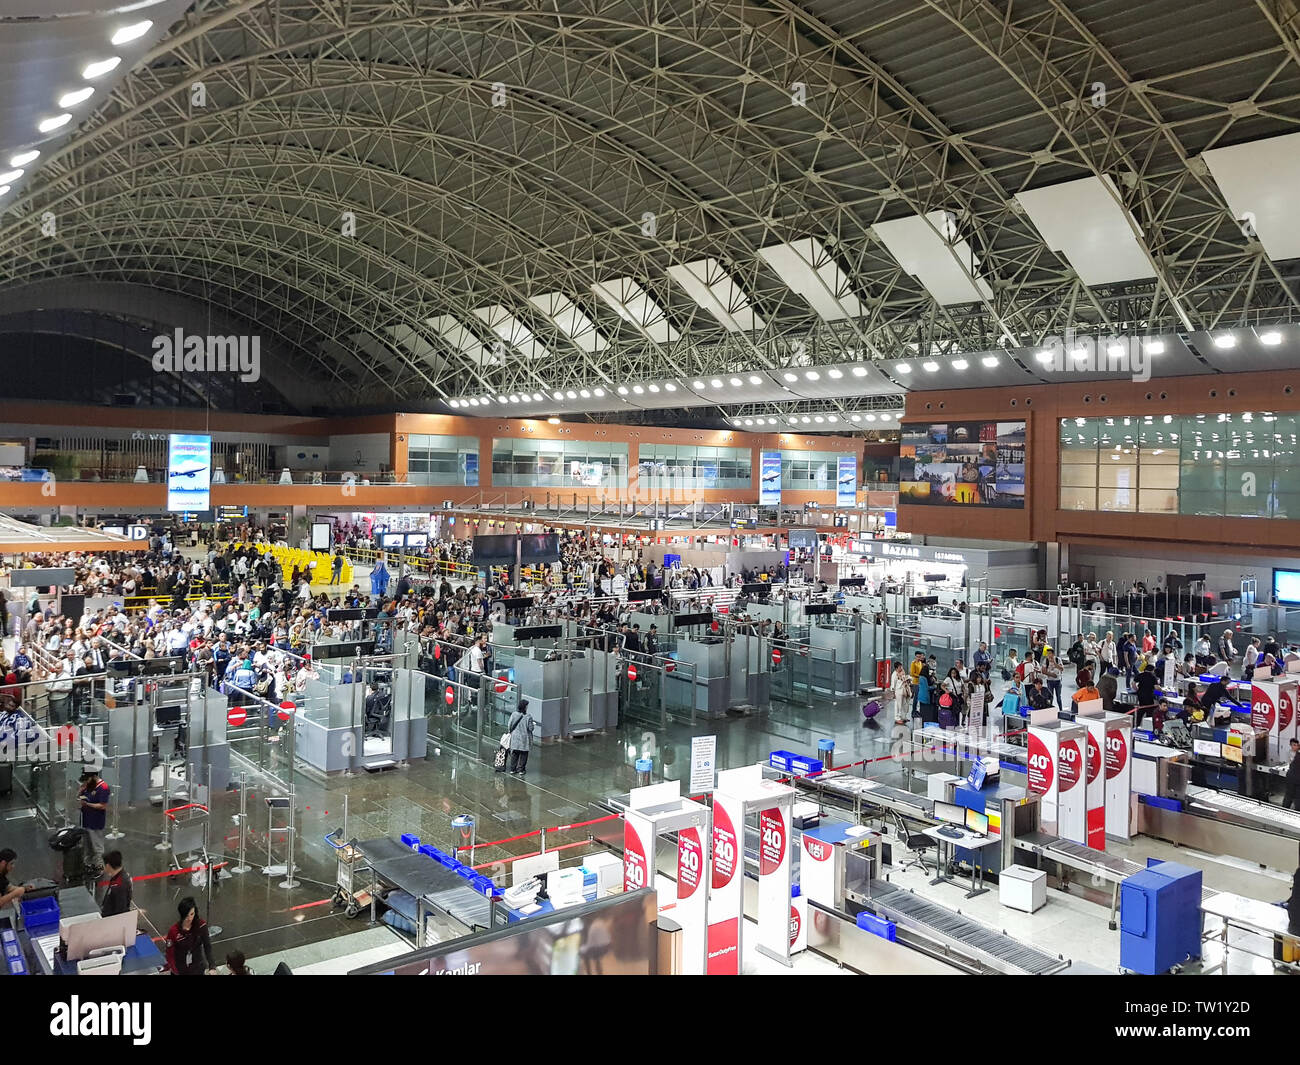 ISTANBUL, TURKEY - APRIL 30, 2019: Passport control and security check area in Istanbul Sabiha Gokcen International Airport. Stock Photo